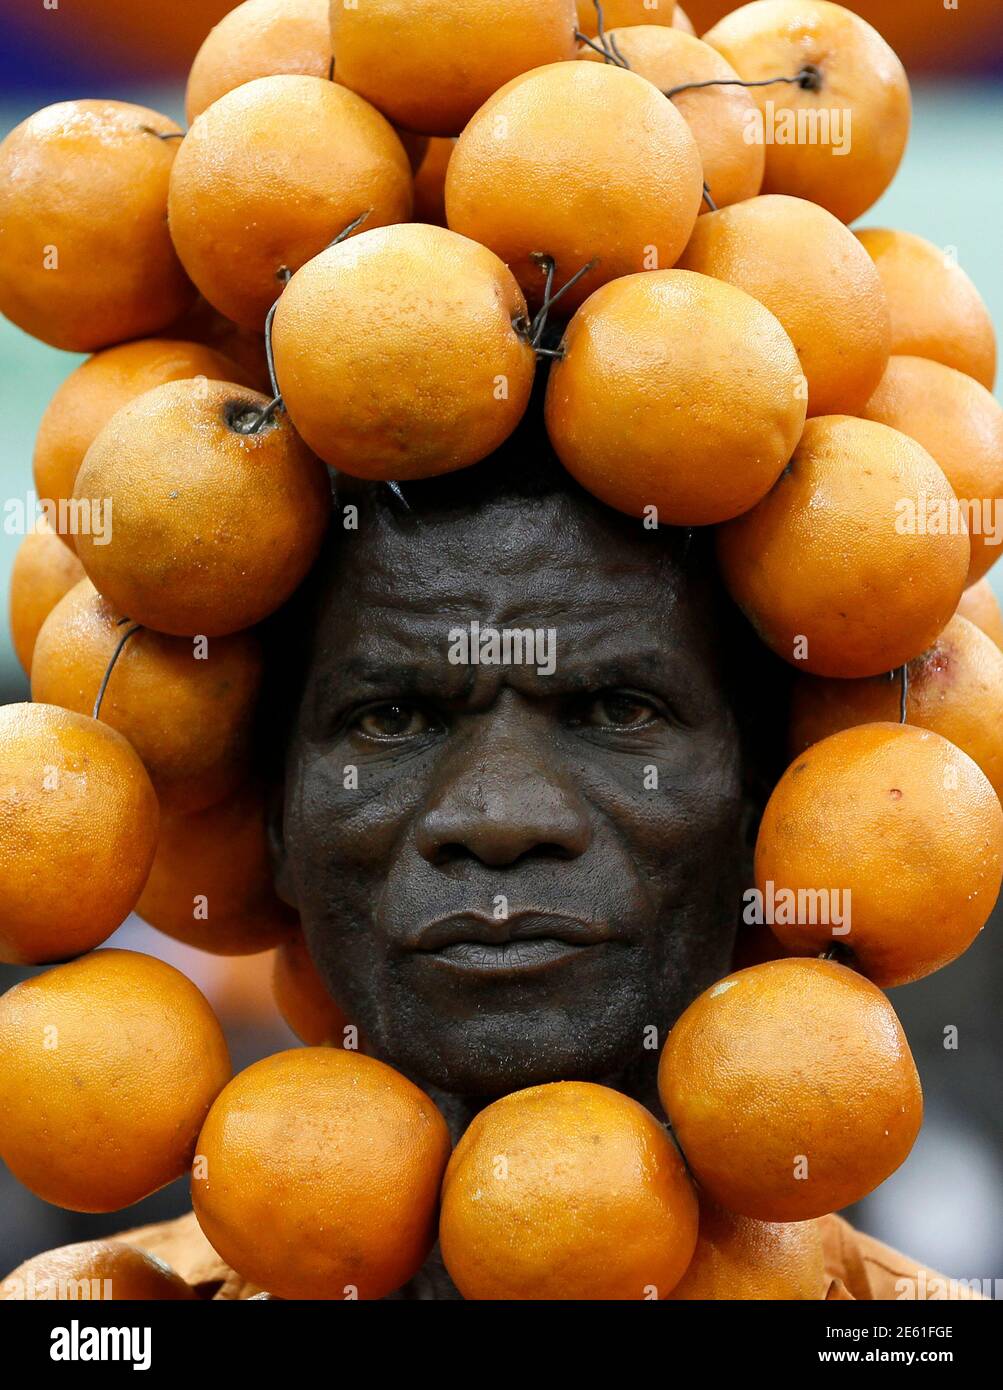 A supporter of the Orange Democratic Movement (ODM) party adorned with oranges on his head attends their National delegates convention to elect new party national office bearers in Kenya's capital Nairobi, February 28, 2014. Elections for the Orange Democratic Party were thrown into disarray on Friday afternoon after a group demanded the production of registers, before turning violent, local media reported. REUTERS/Thomas Mukoya (KENYA - Tags: POLITICS ELECTIONS TPX IMAGES OF THE DAY) Stock Photo